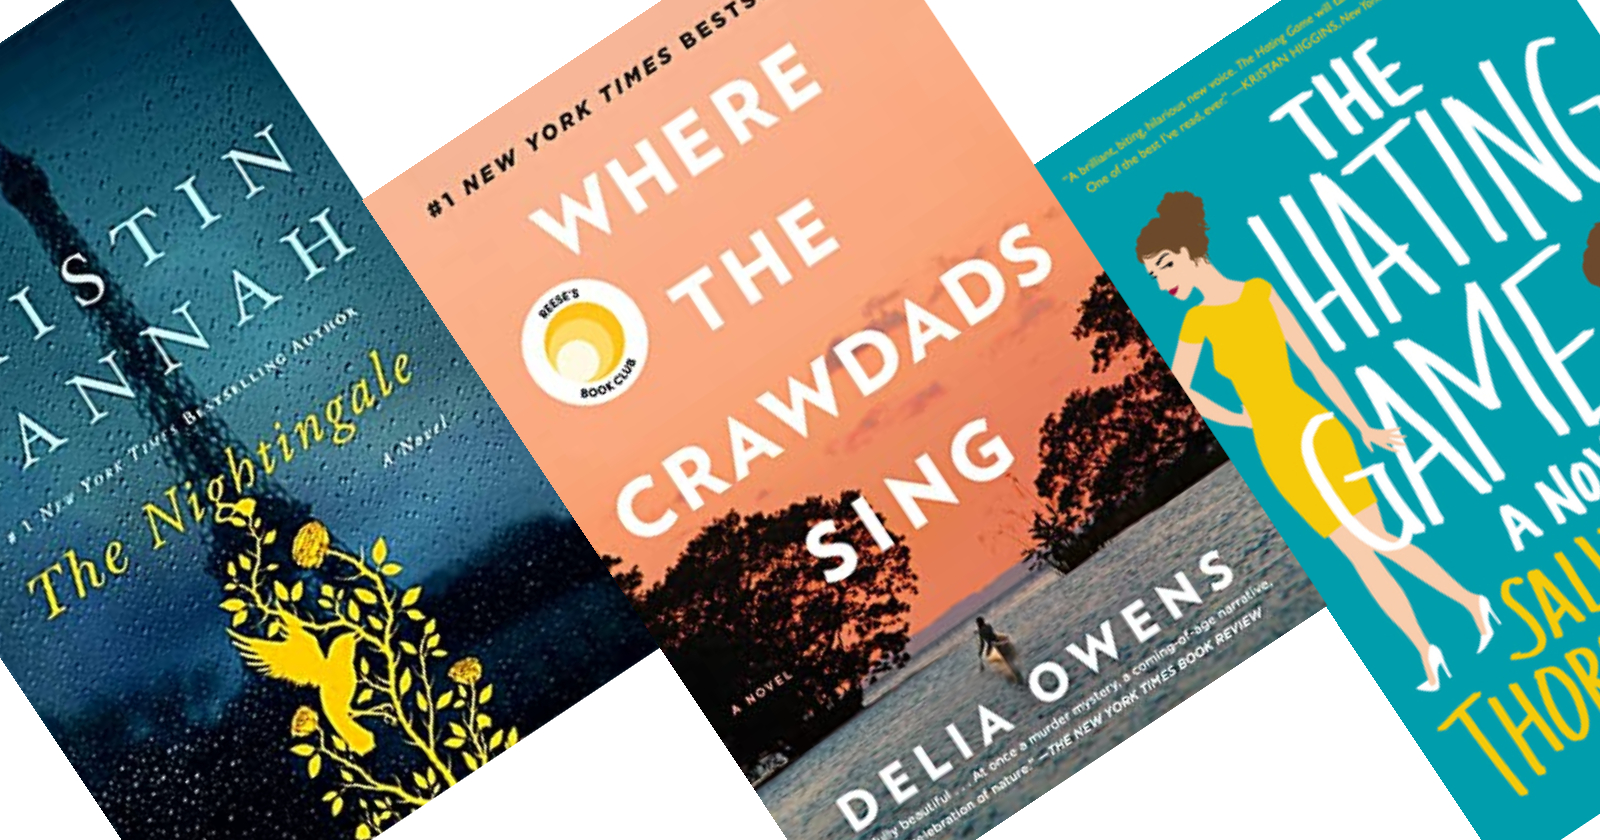 Three tilted book covers - center image coral background with Where the Crawdads Sign title.